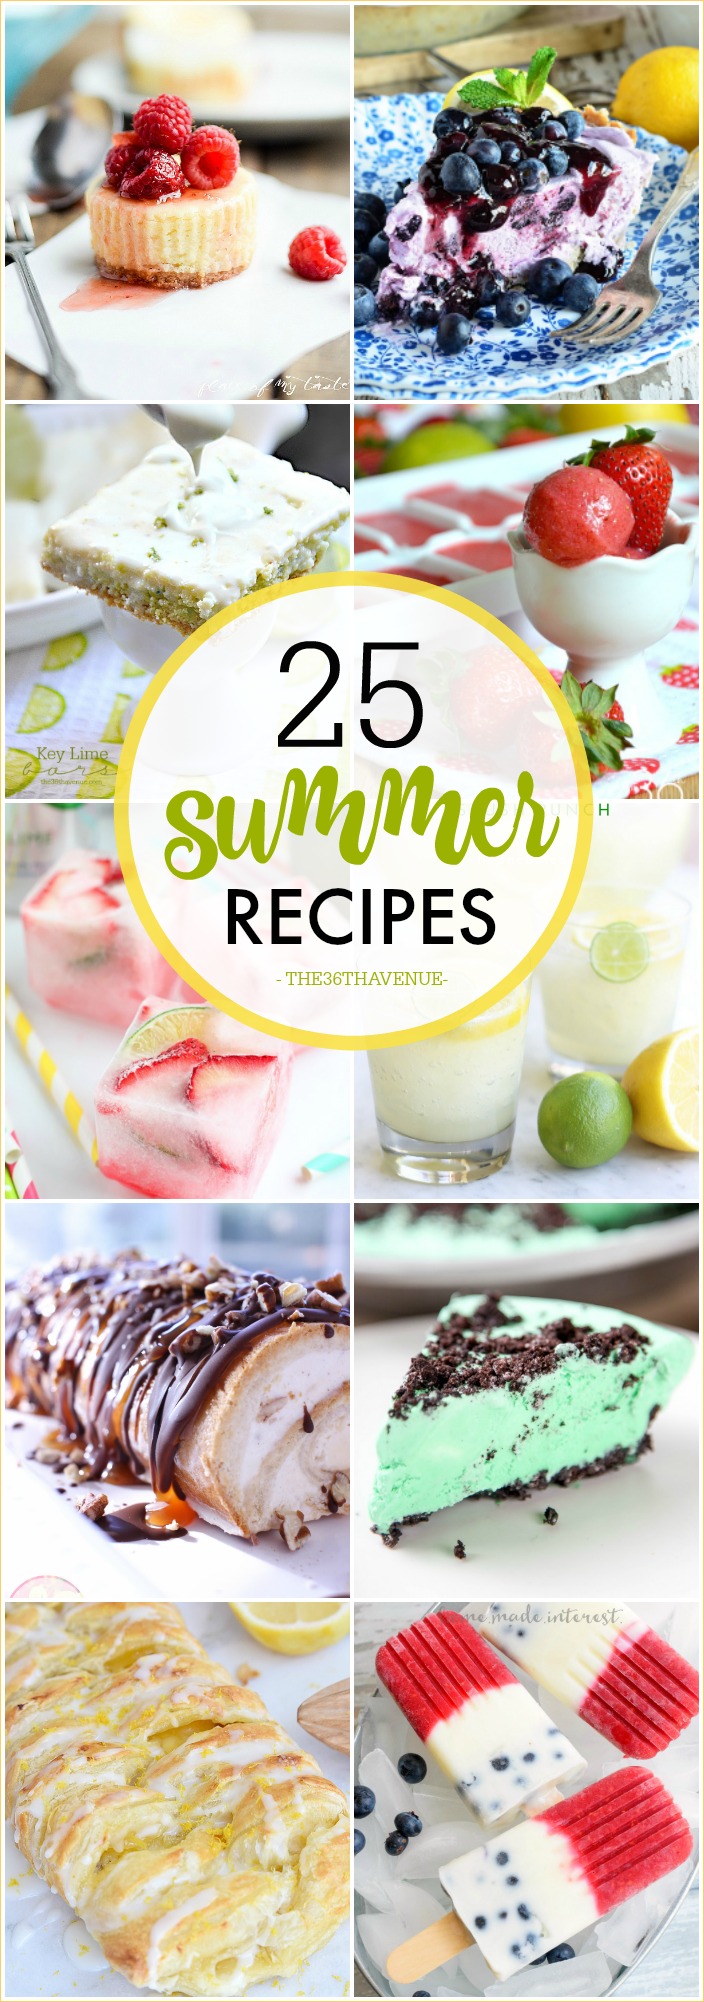 Dessert Recipes - 25 Summer Recipes that are refreshing, fruity, and full of flavor. Pin it now and make them later!